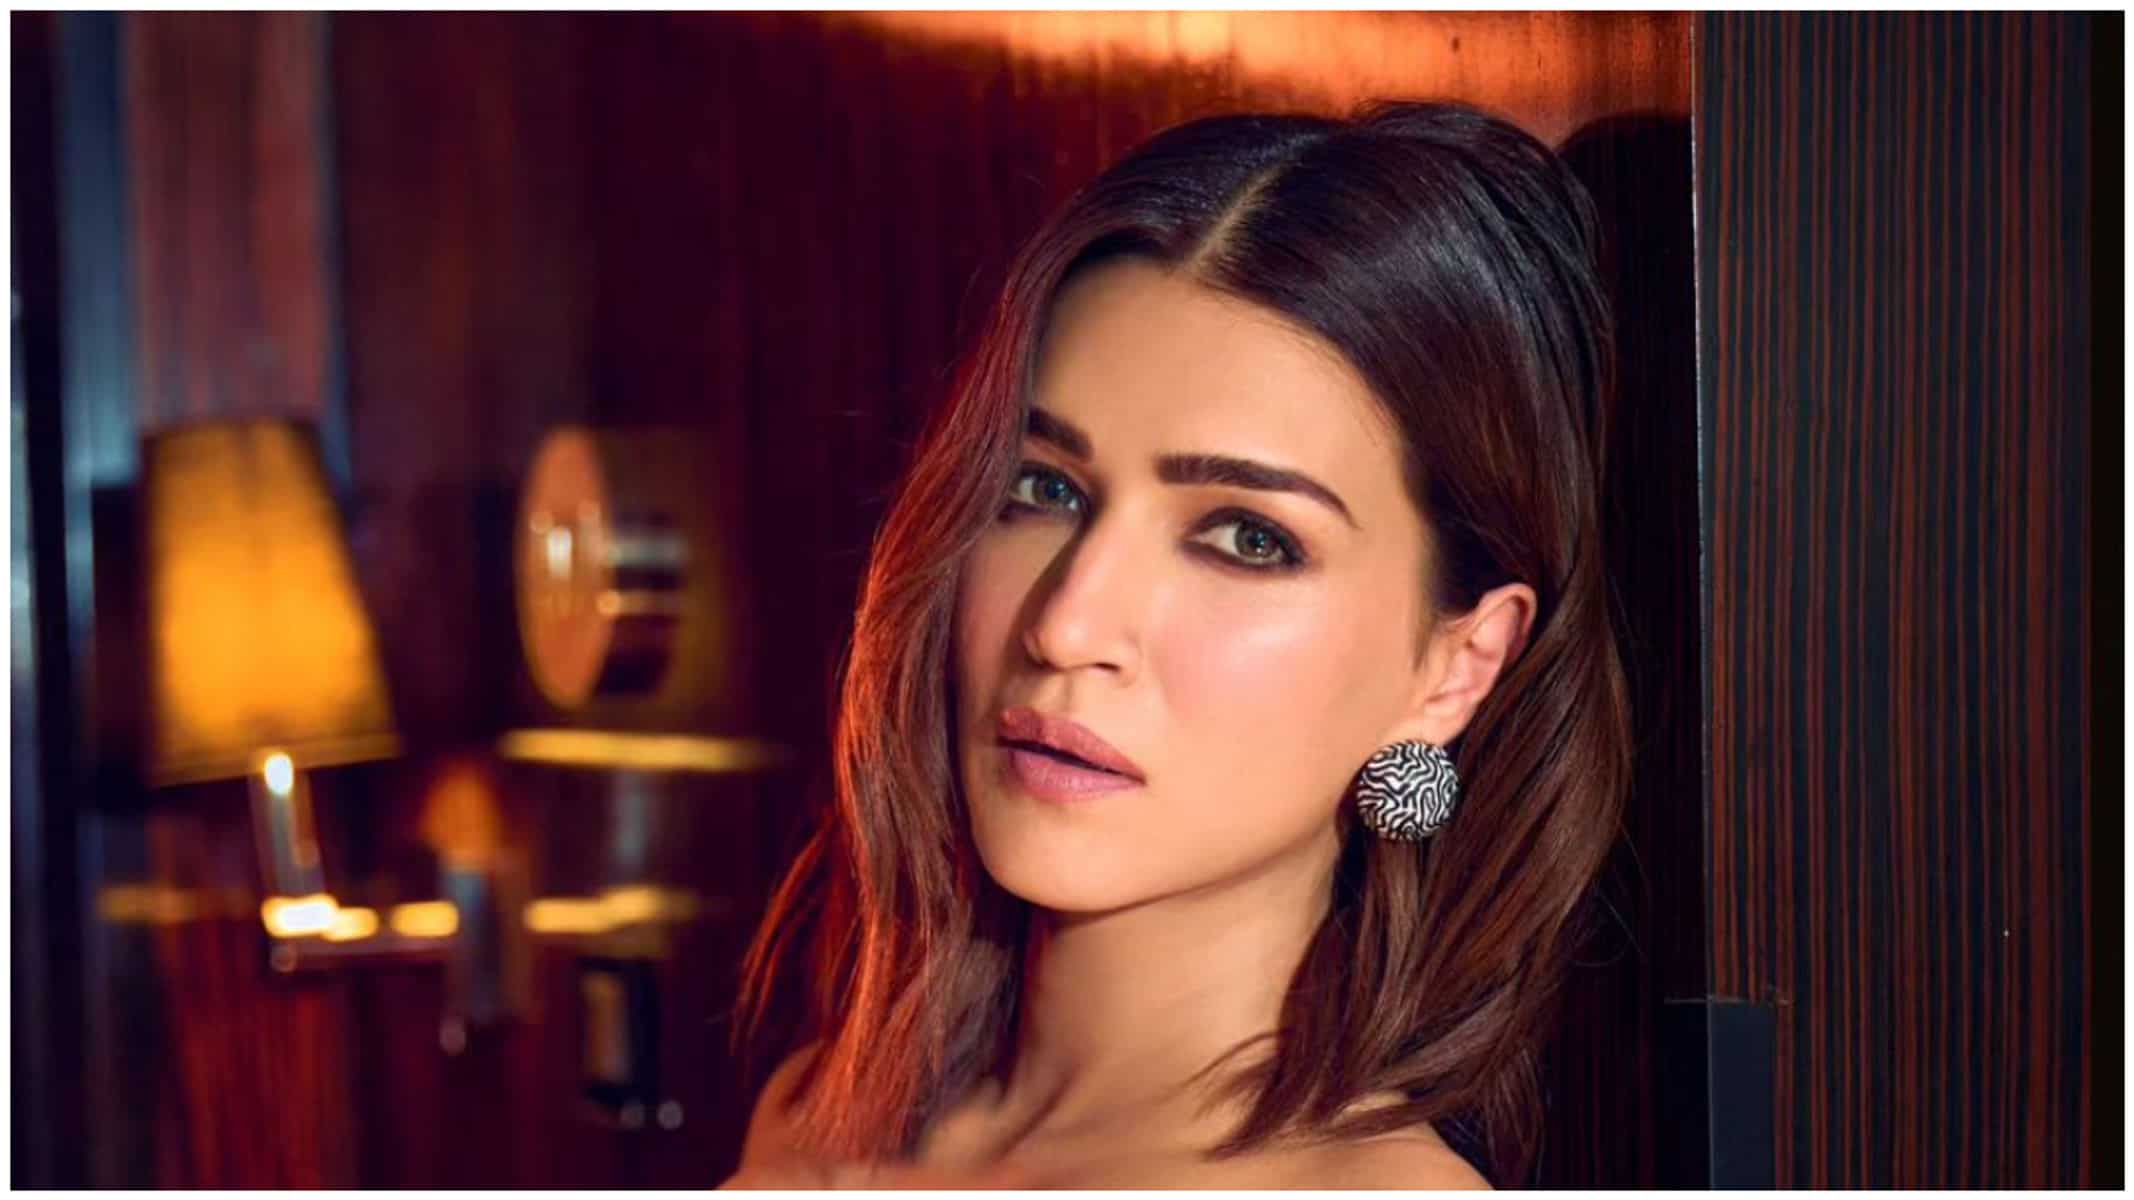 https://www.mobilemasala.com/film-gossip/Kriti-Sanon-details-how-she-feels-working-with-Kanika-Dhillon-in-Do-Patti---Creatively-satisfied-as-i251523